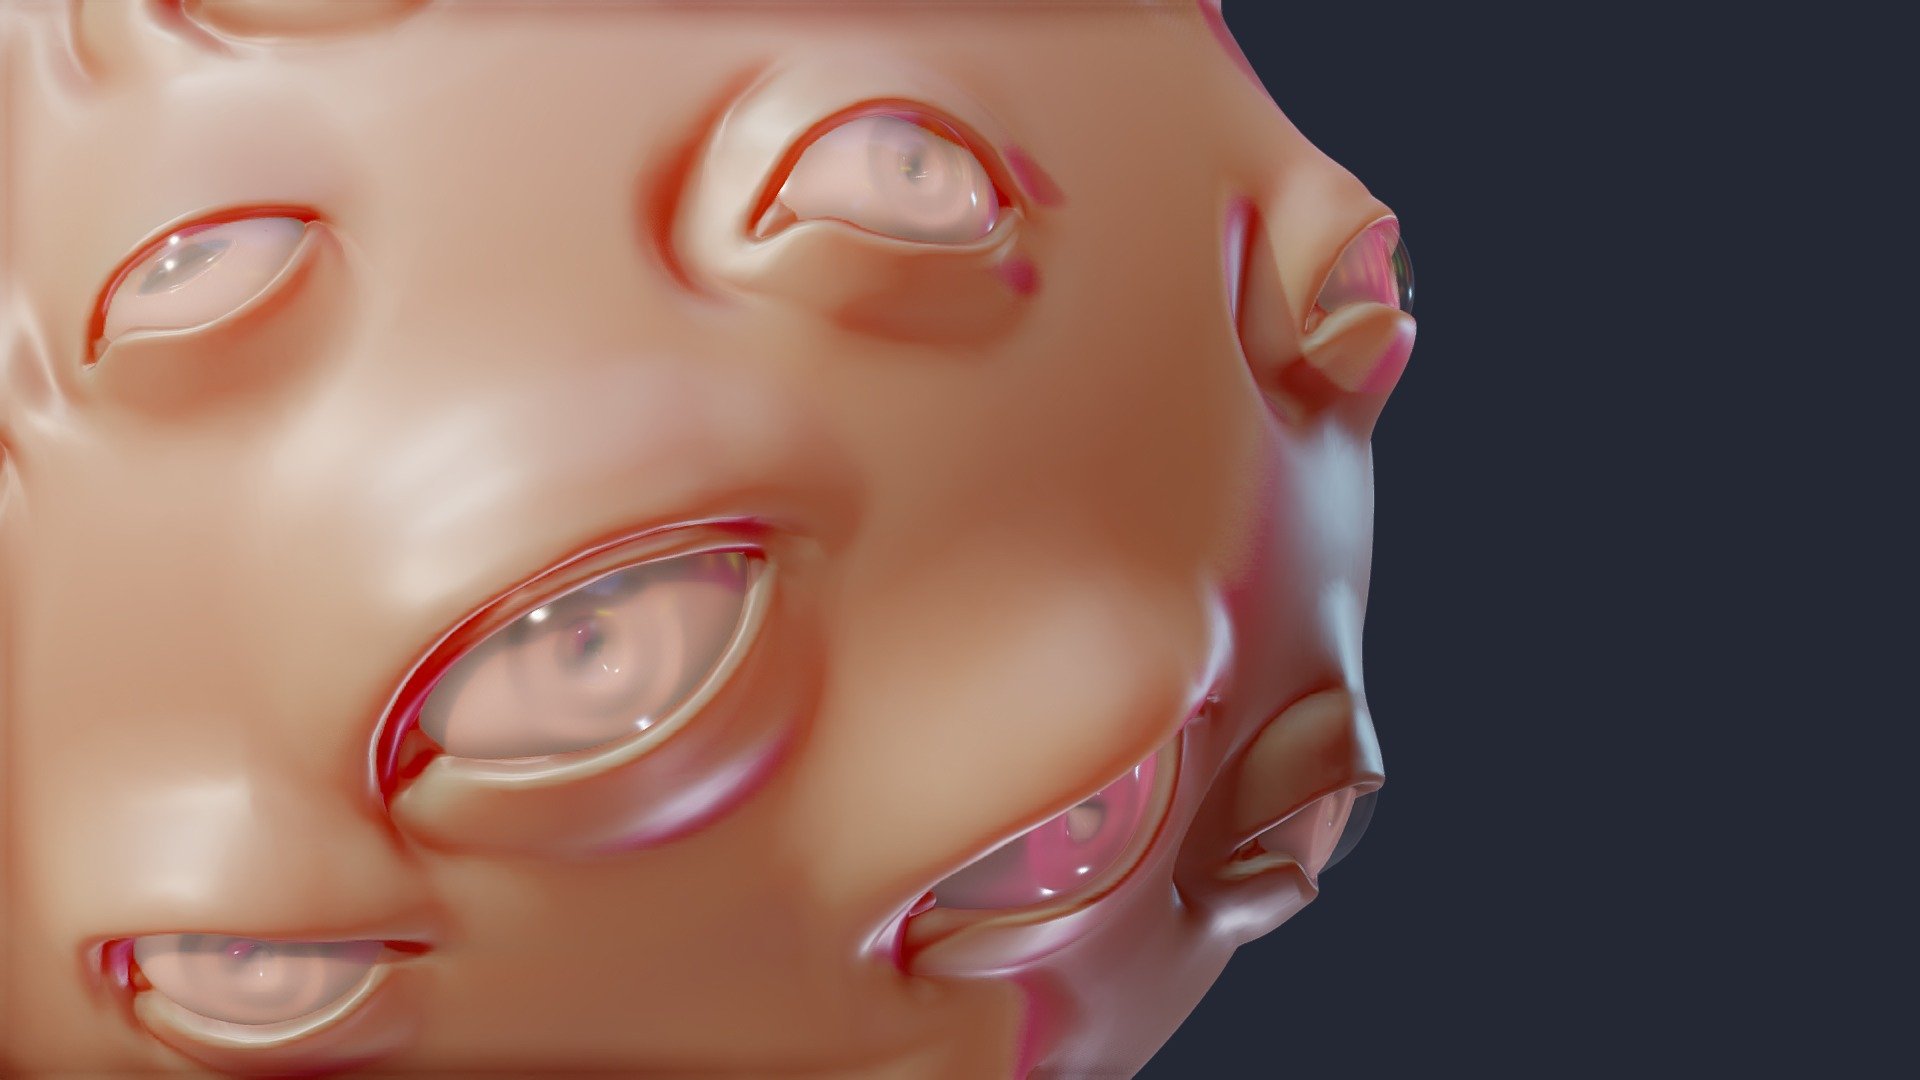 vdm from existing model zbrush